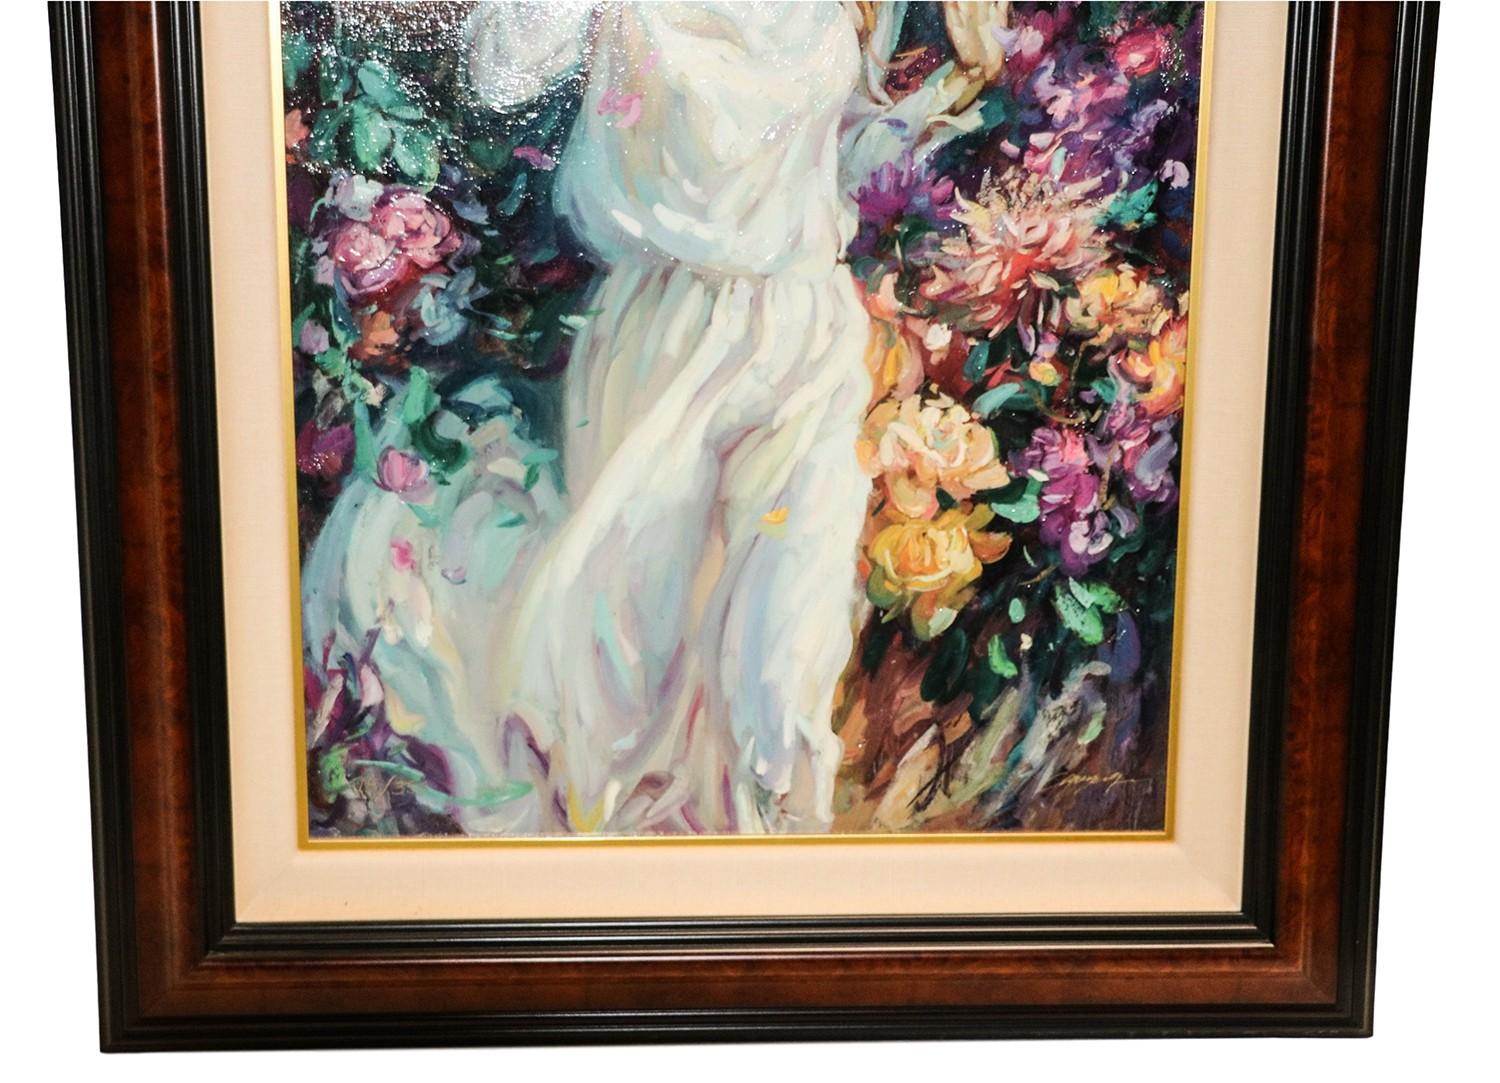 Cao Yong “Winds Of Love” Giclee on canvas Artist Proof Giclee on Canvas The Romantic Garden Series image size (31? tall x 18.5? wide) Limited edition of 350 signed and numbered. “Winds Of Love” is a limited edition produced by the artist comes with